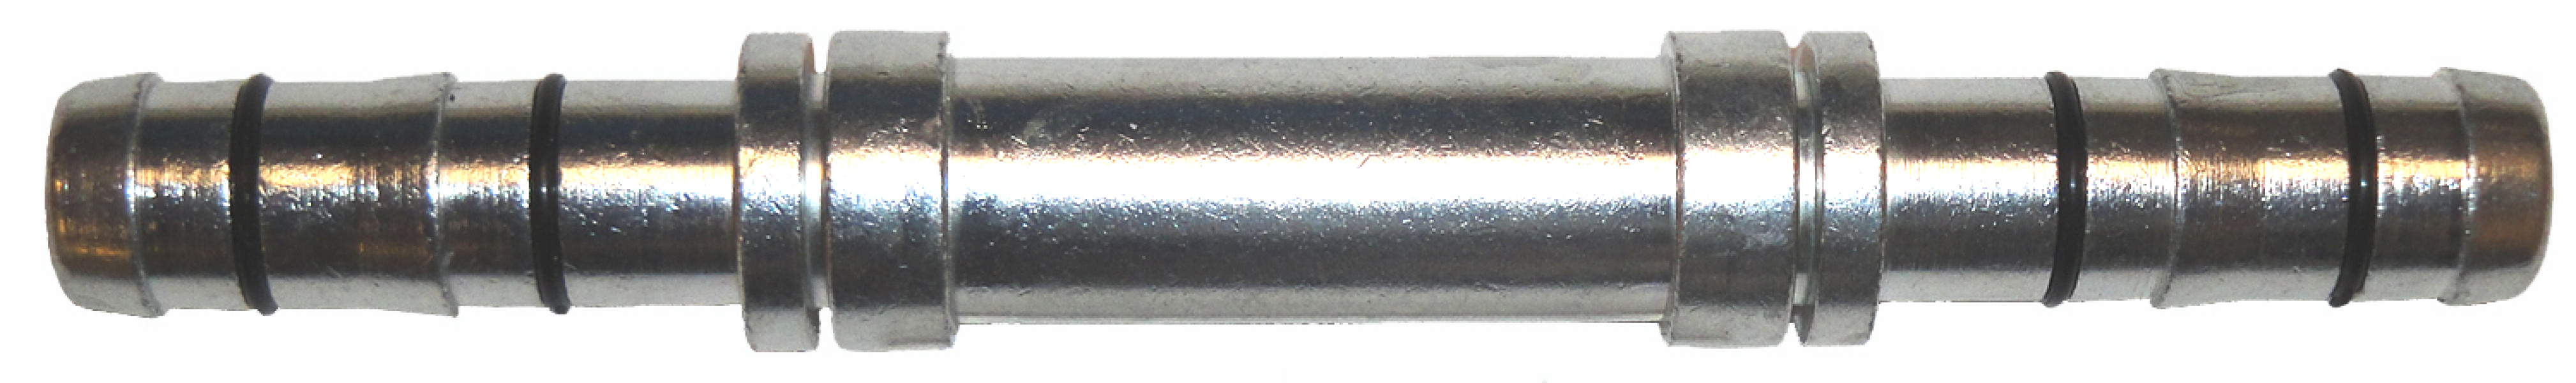 Image of A/C Refrigerant Hose Fitting from Sunair. Part number: FJ3045-1010S